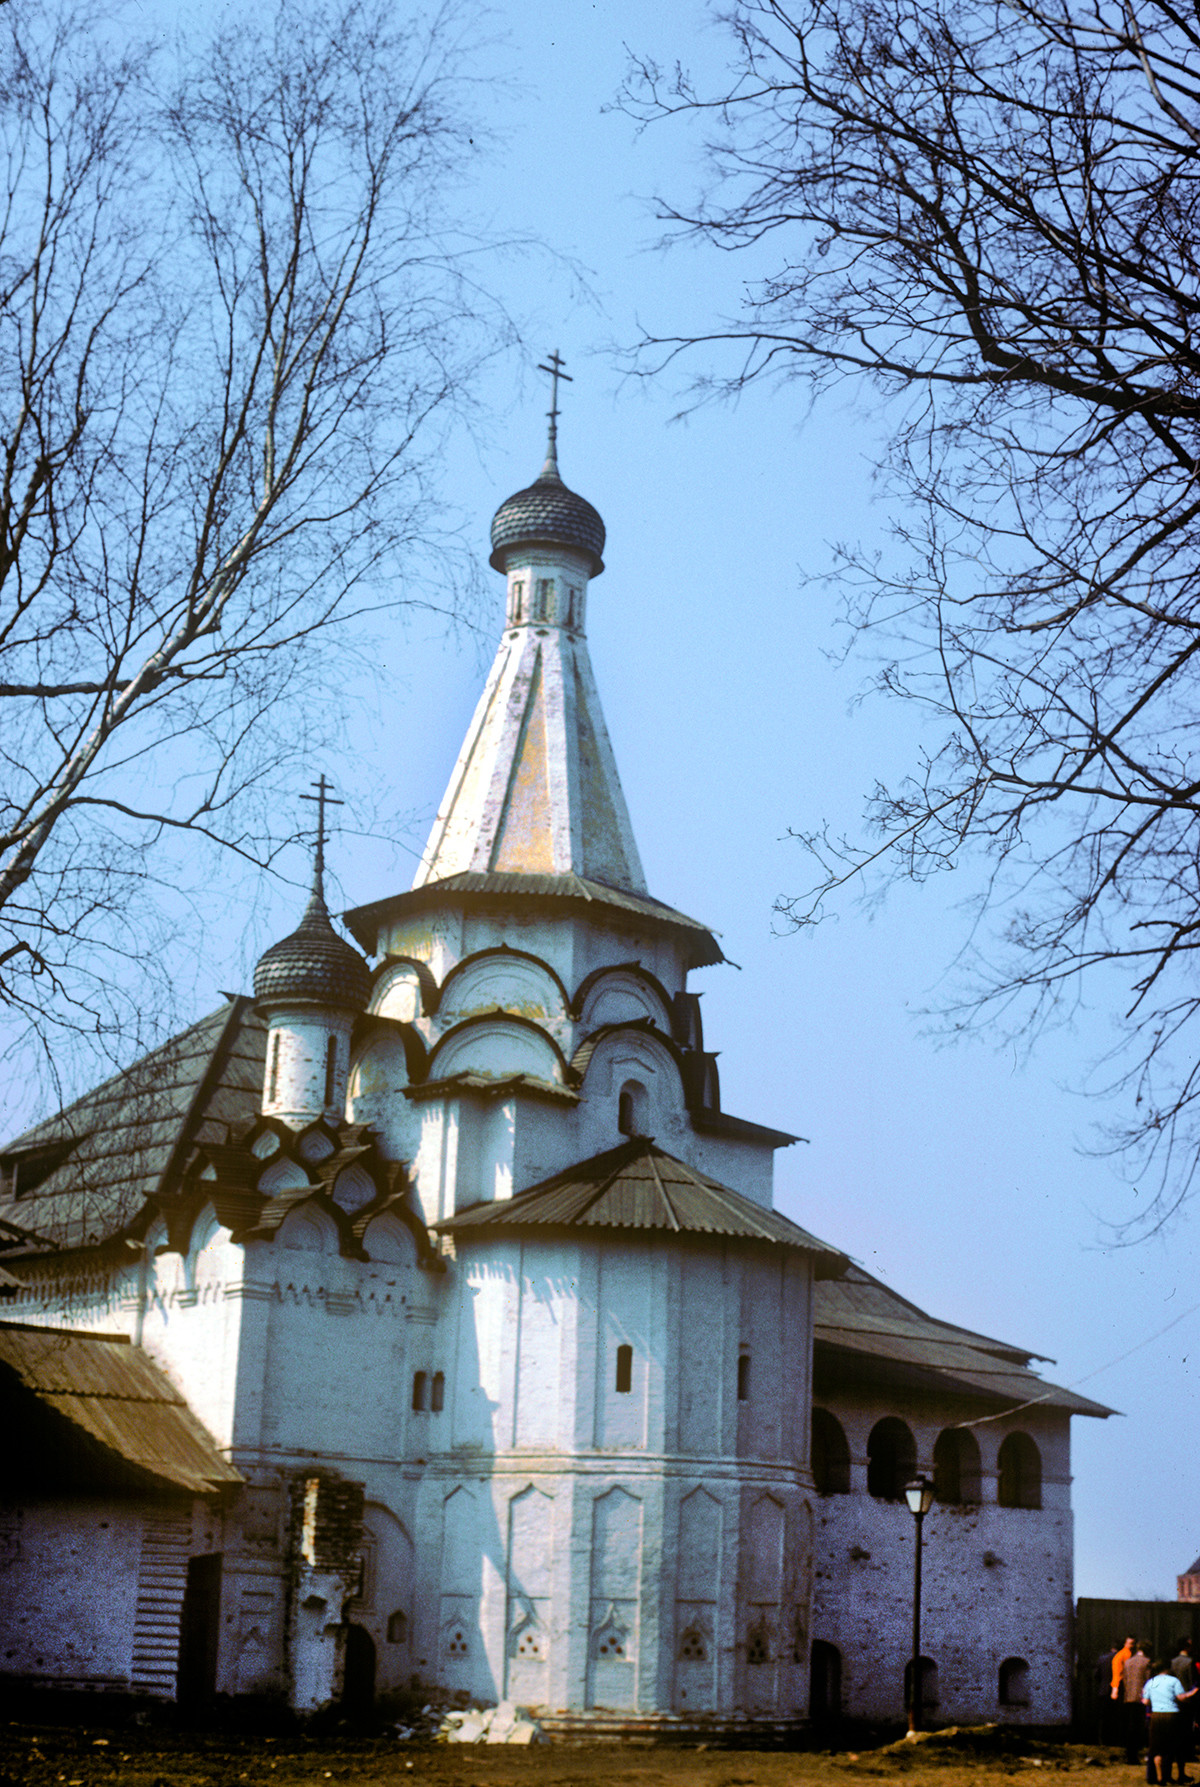 Savior-St. Evfimy Monastery. Church of the Intercession with attached refectory. Southeast view. April 27, 1980